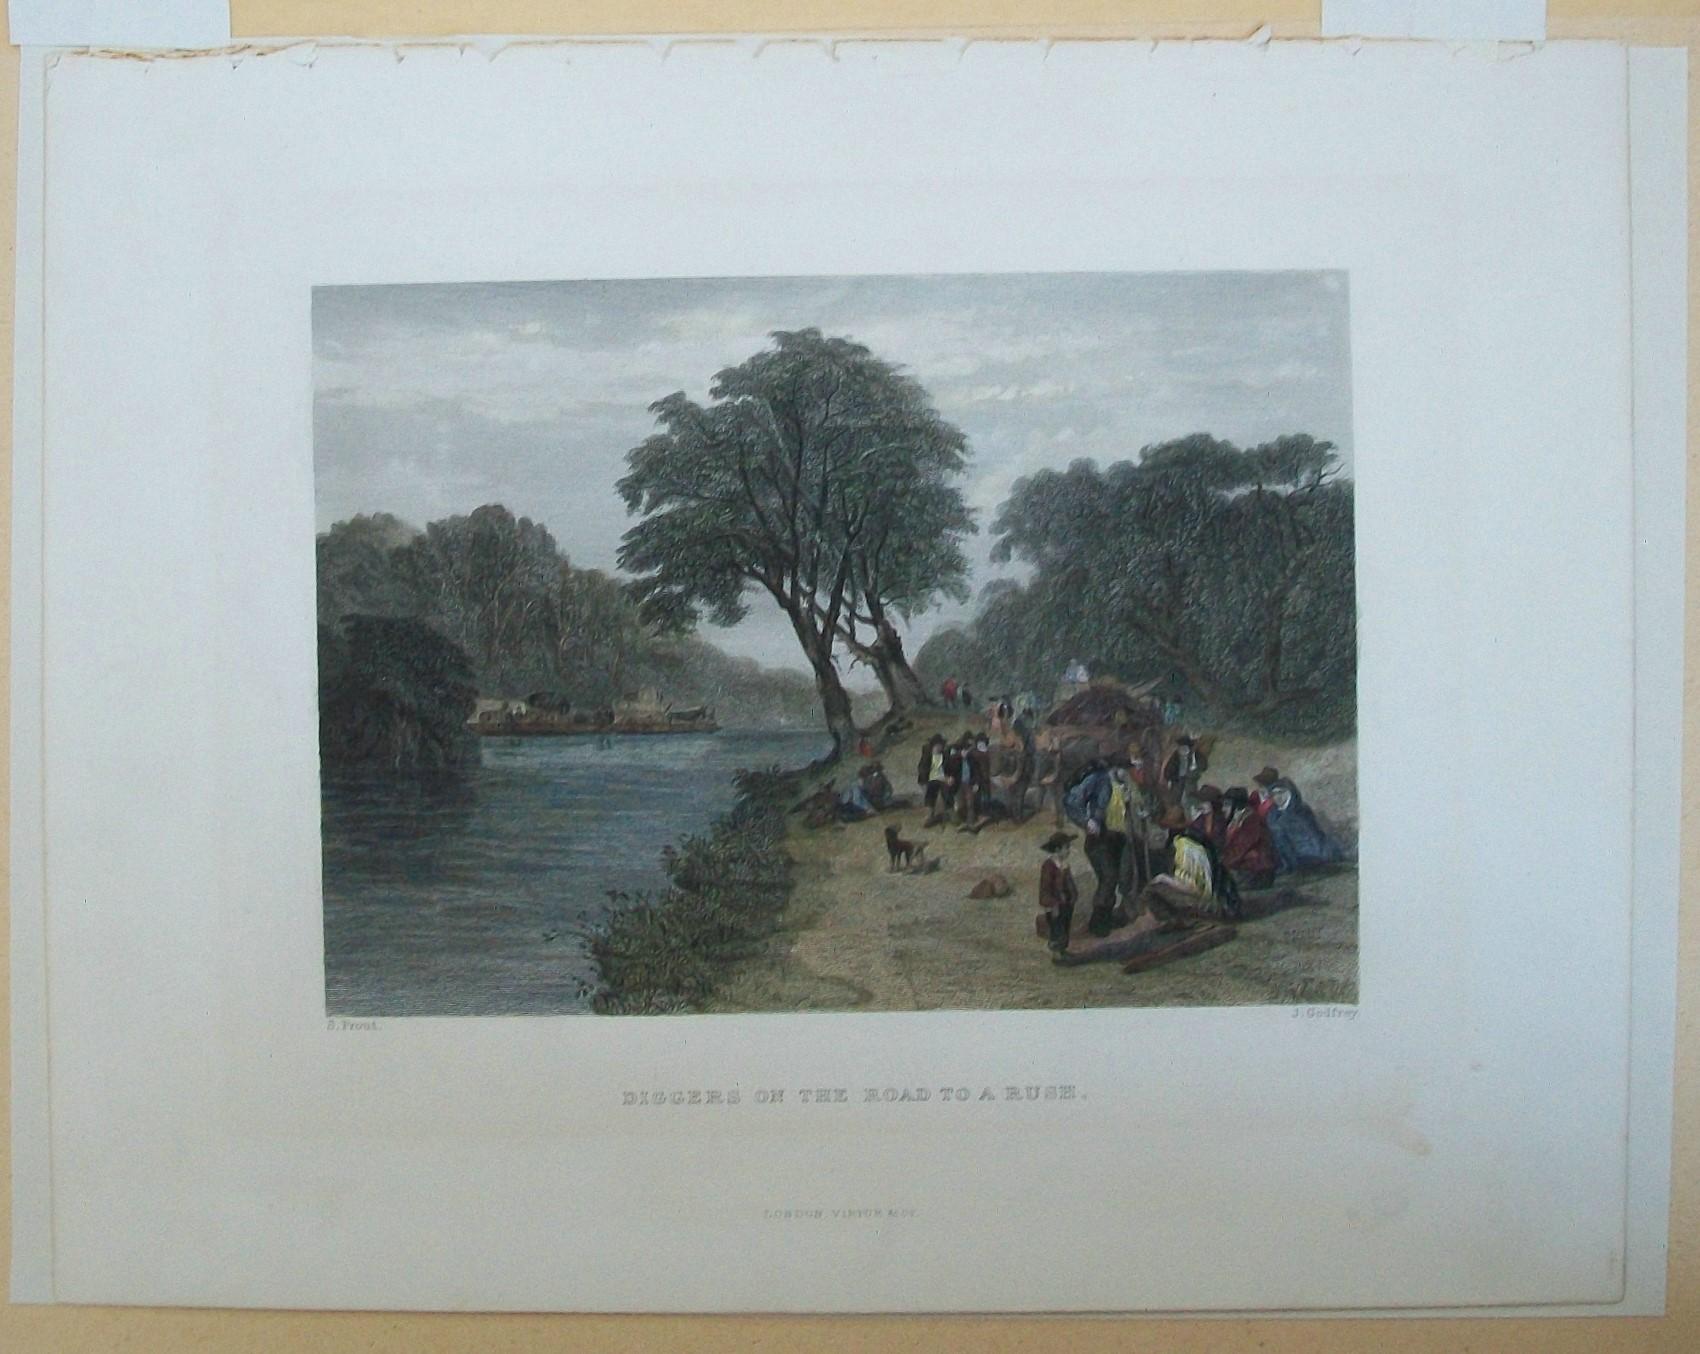 JOHN SKINNER PROUT (1805-1876) - 'Diggers on the Road to a Rush' - Antique steel plate engraving after a painting by J. S. Prout - from 'Australia' by Edwin Carton Booth - hand colored - engraved by John Godfrey - titled lower center - signed lower